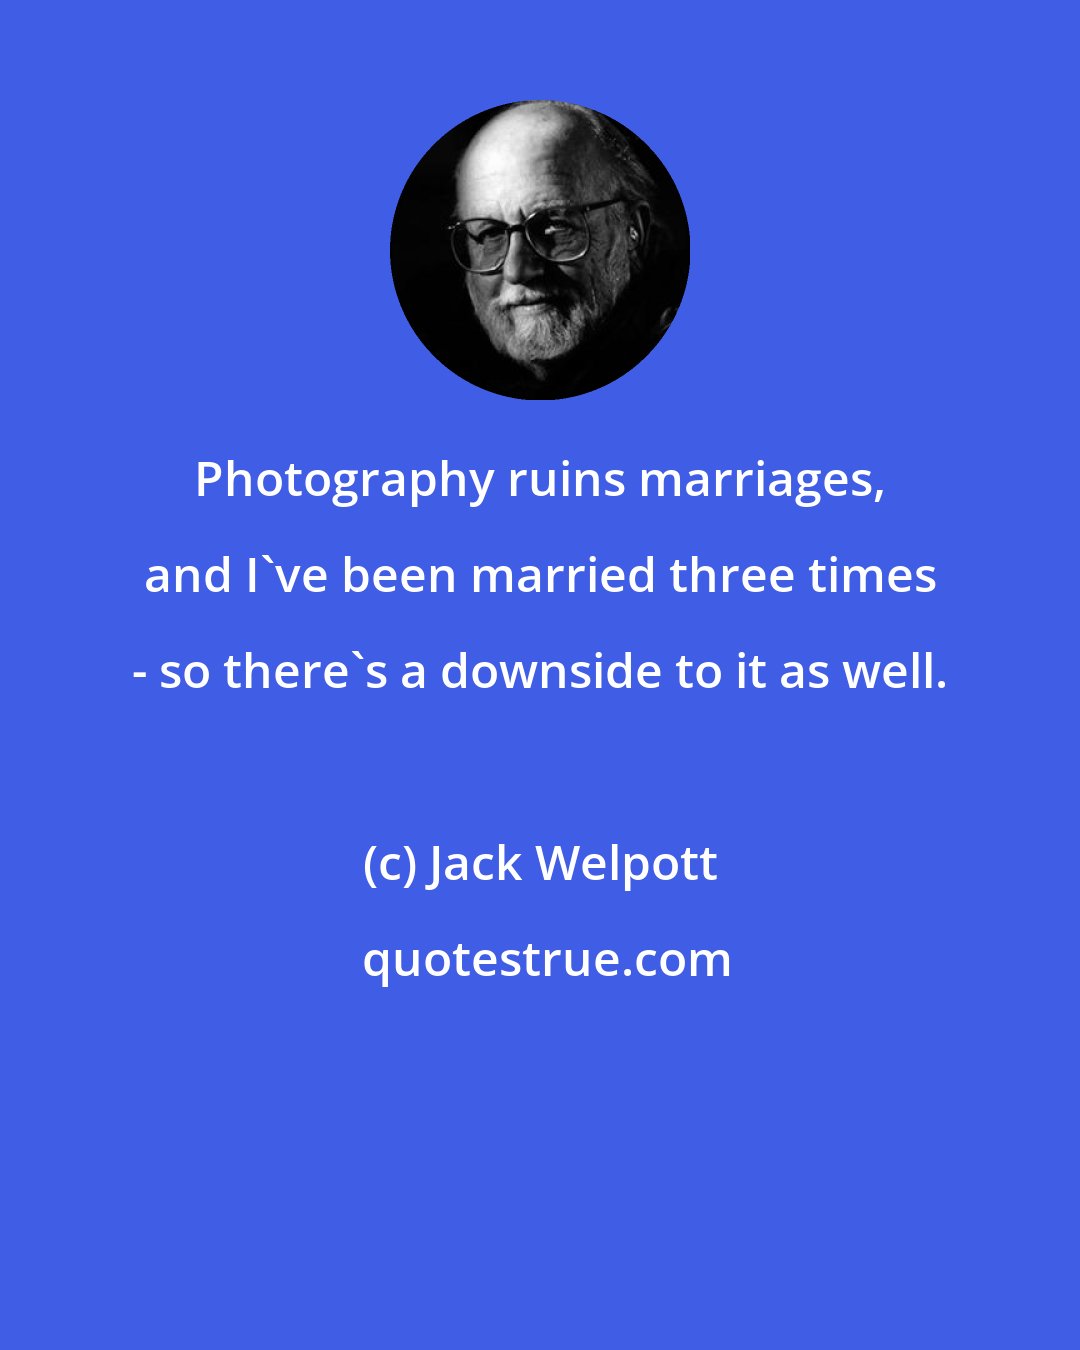 Jack Welpott: Photography ruins marriages, and I've been married three times - so there's a downside to it as well.